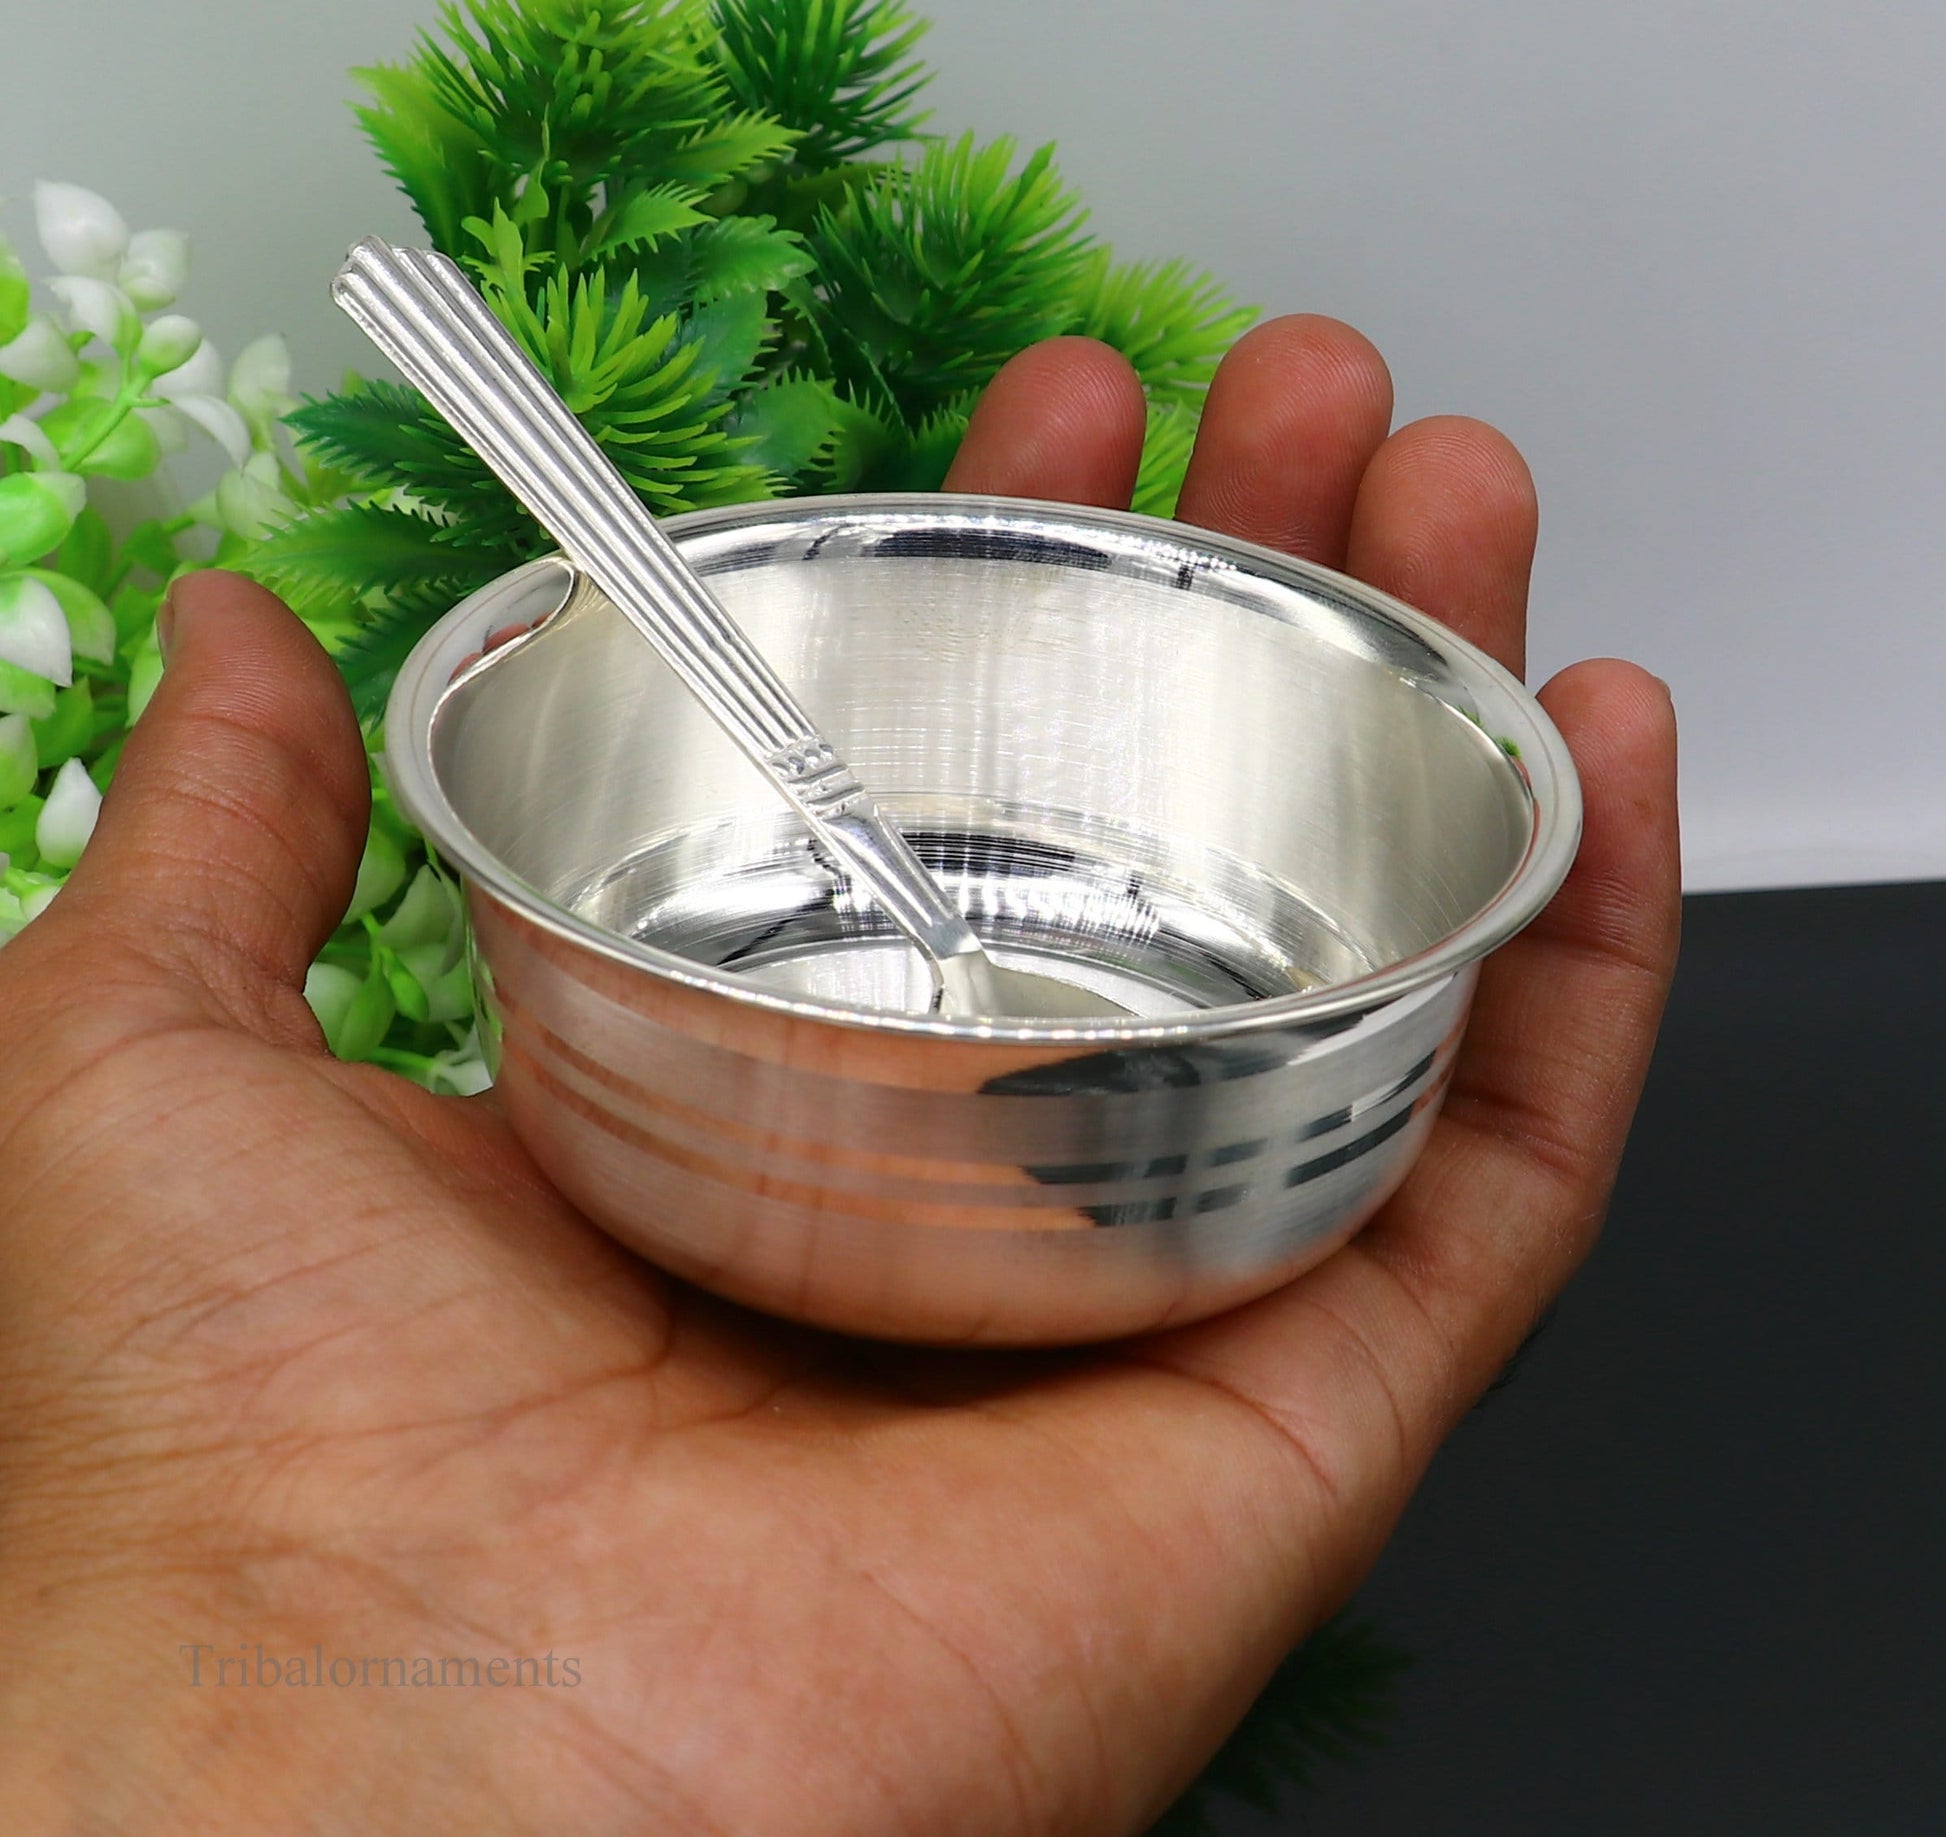 999 fine solid silver handmade small bowl for baby food, pure silver vessels, silver utensils, home and kitchen accessories India sv222 - TRIBAL ORNAMENTS